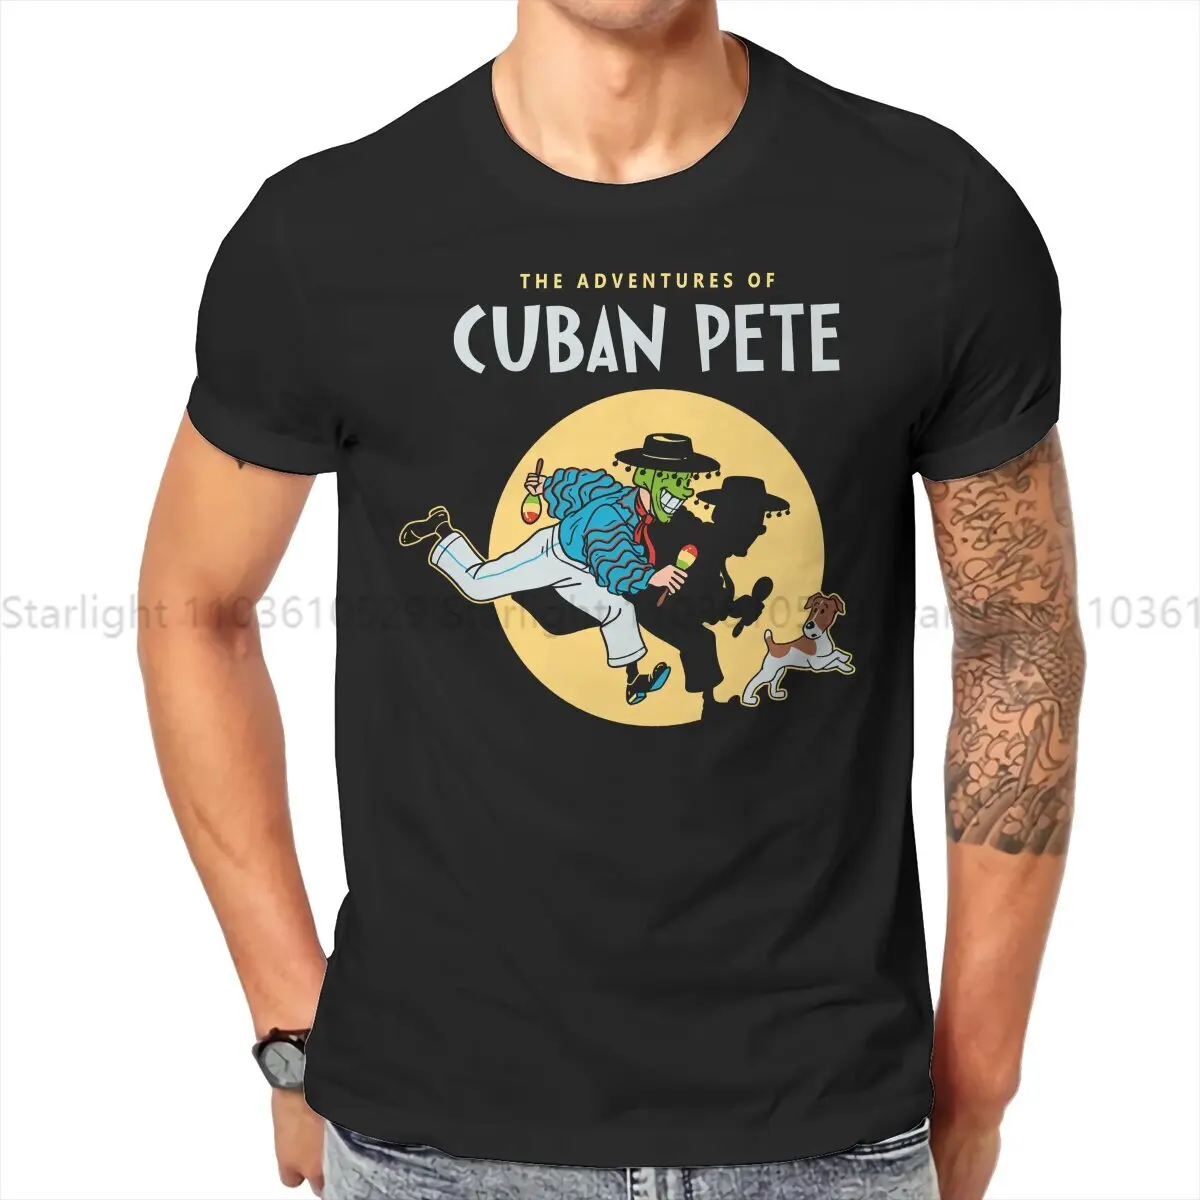 The Mask Movie TShirt The Adventures of Cuban Pete Basic T Shirt Oversized Men Clothes New Design